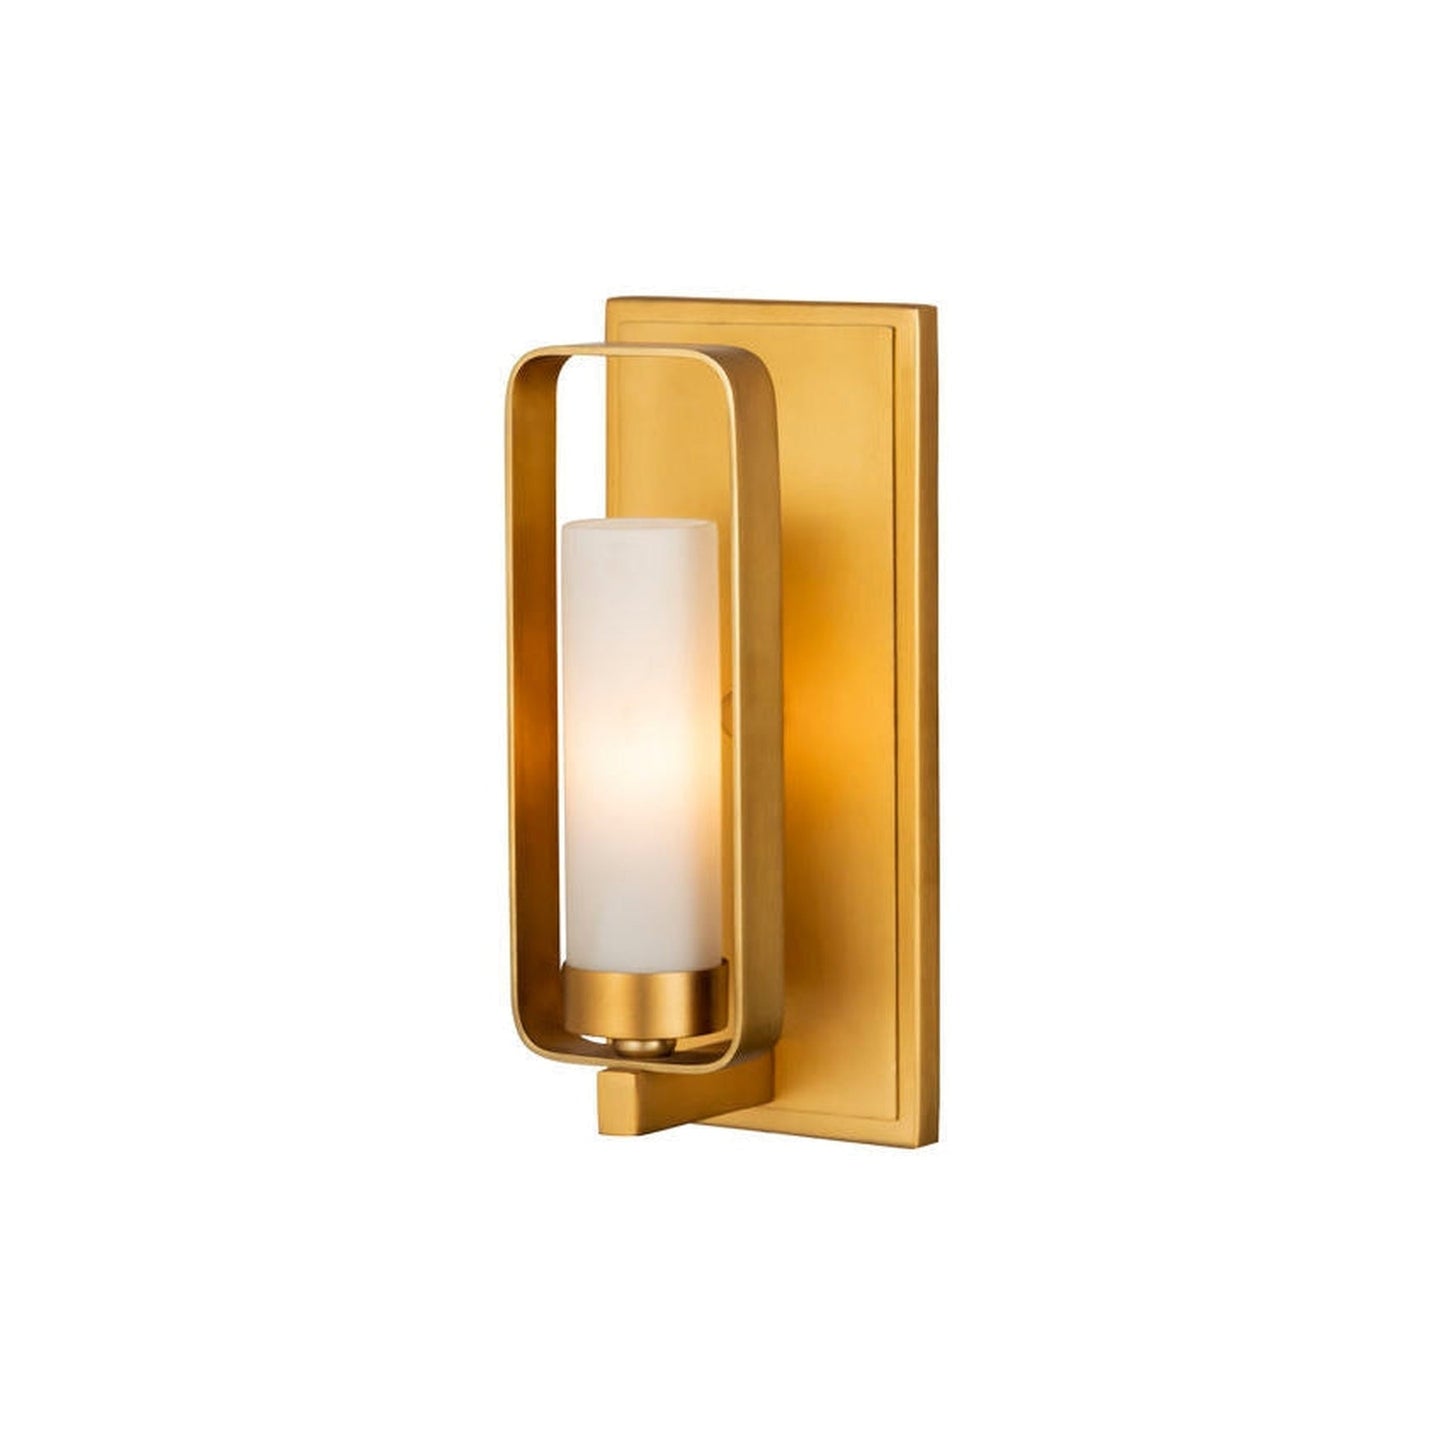 Z-Lite Aideen 5" 1-Light Tawny Brass Wall Sconce With Matte Opal Glass Shade